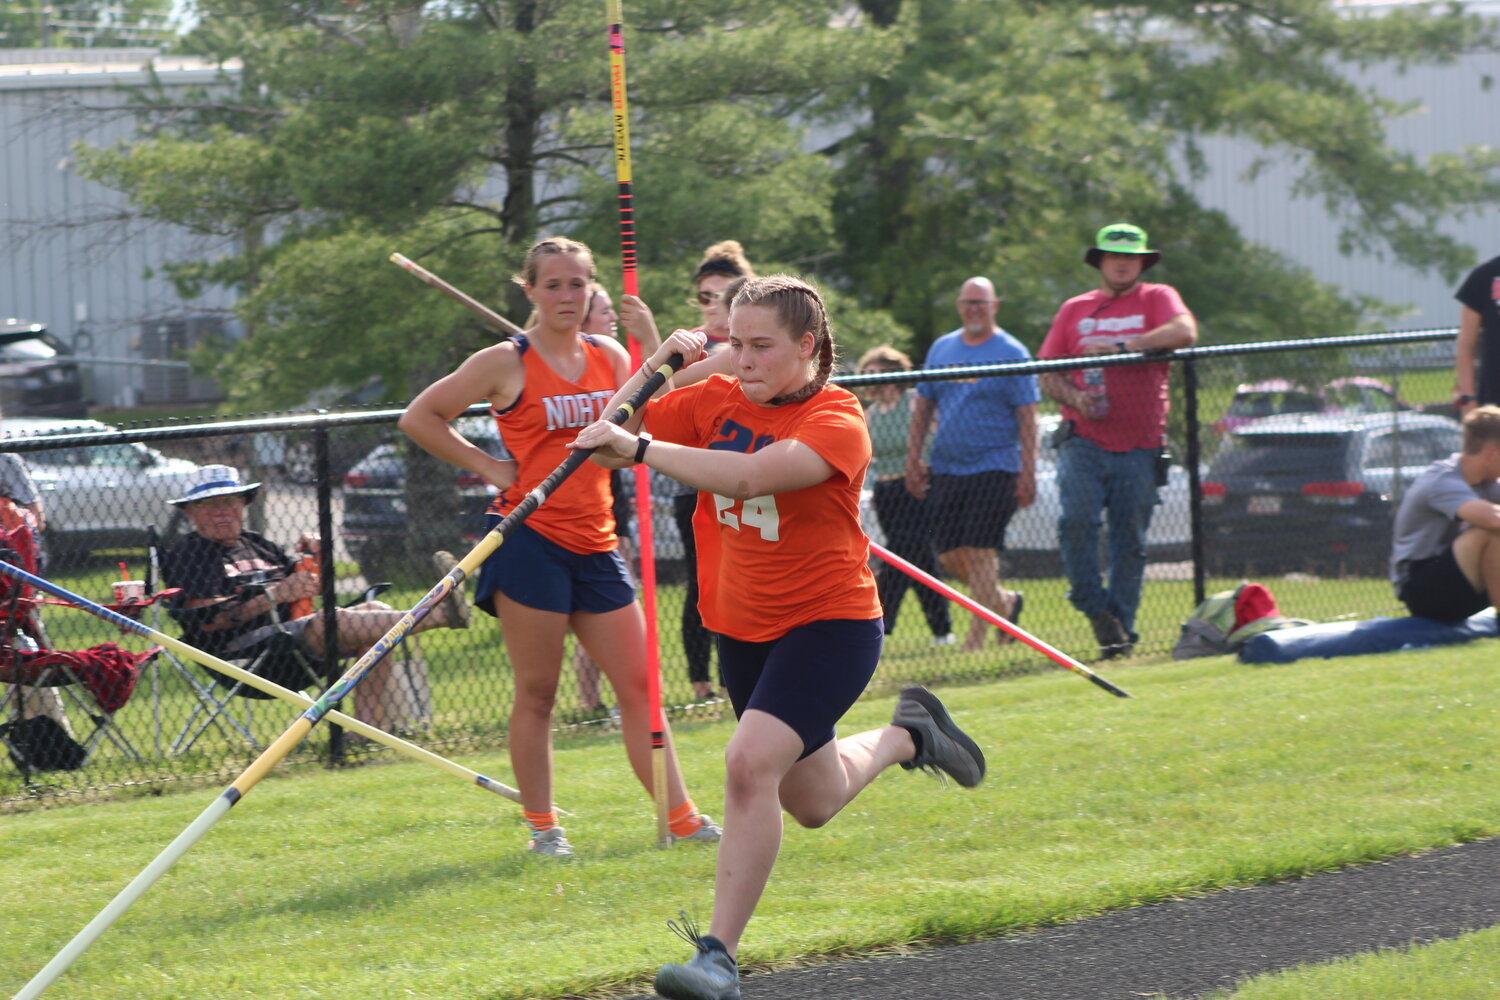 North Montgomery's Hailey Kunz earned a county title for the Charger girls in the pole vault.